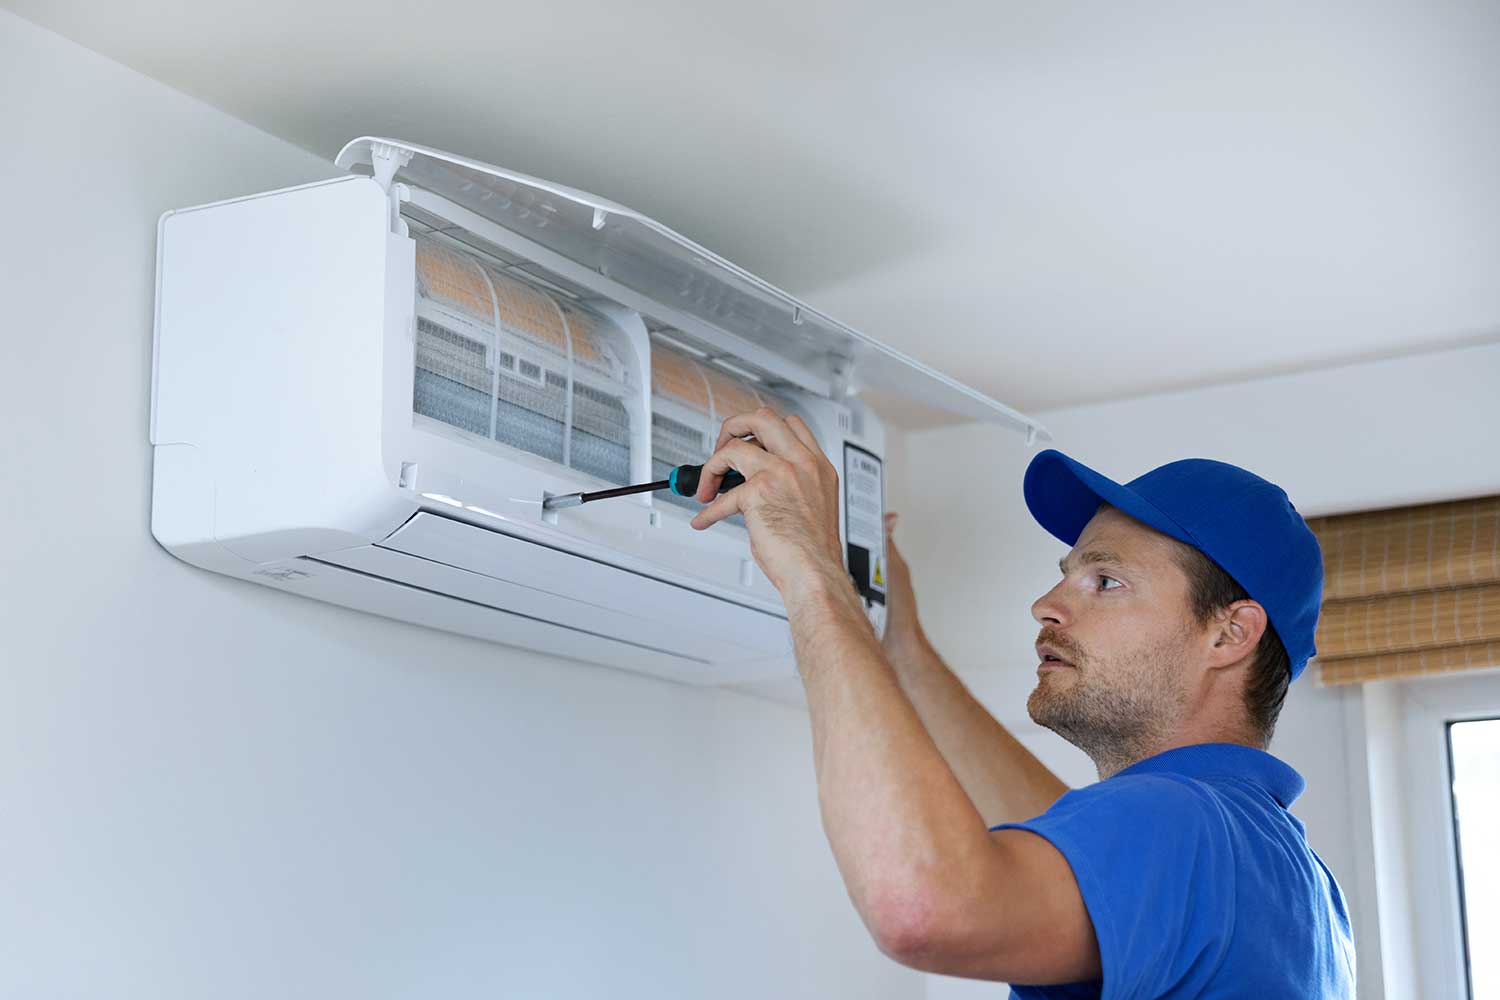 New commercial Heating & A/C improves morale and productivity